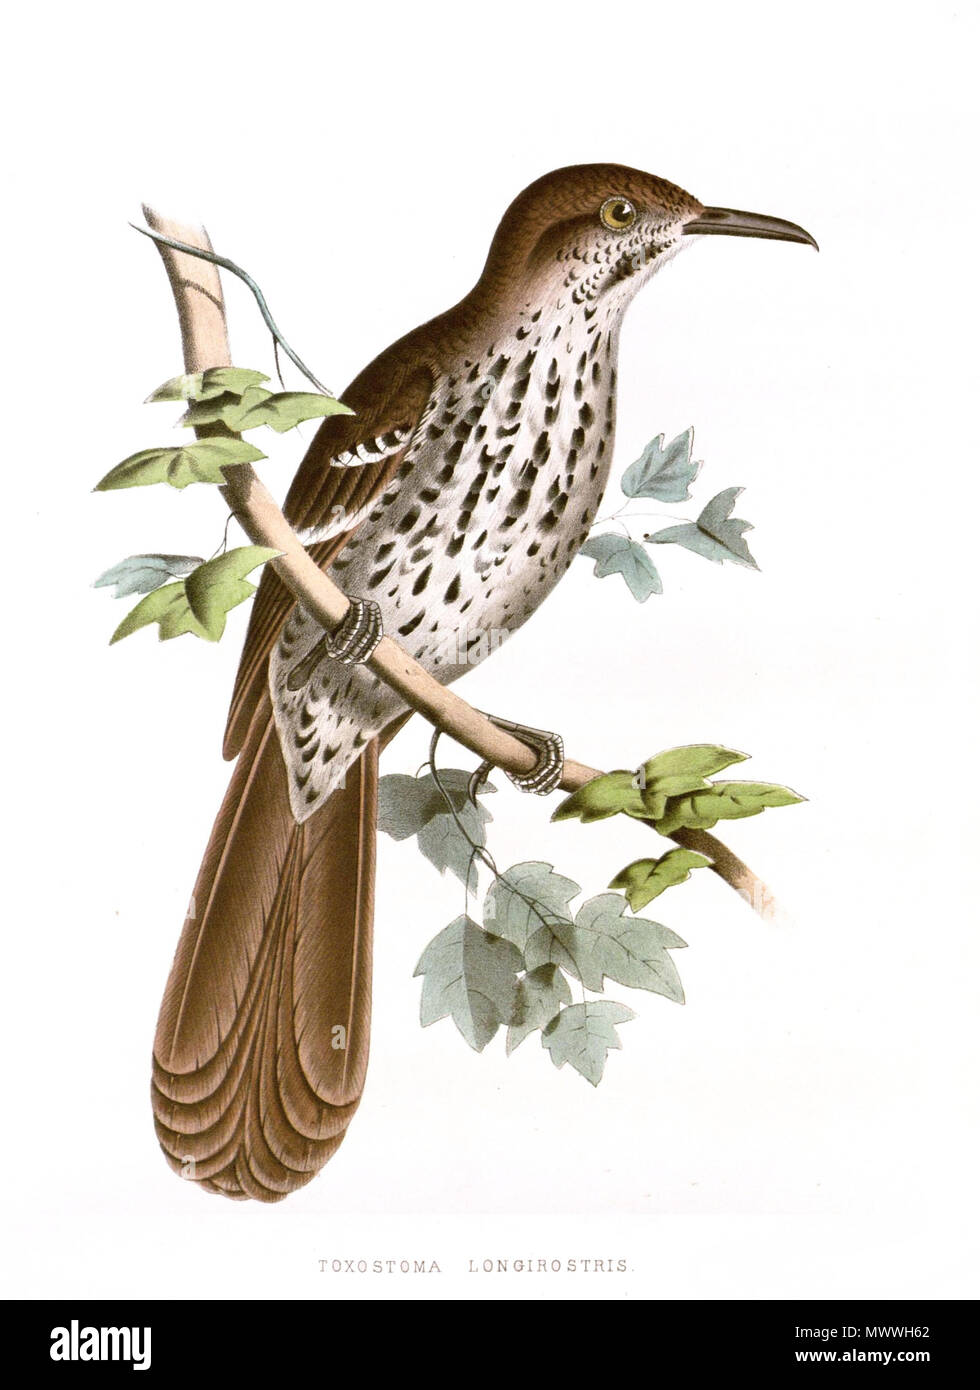 . English: Adult Long-billed Thrasher, Toxostoma longirostre senetti, illustration from Birds of the Boundary Deutsch: Langschnabel-Spottdrossel (Toxostoma Longirostre) . 1860. Painting by Spencer F. Baird Scan or photo by Earwig (talk page in German) 613 Toxostoma longirostre Boundary Survey Painting Stock Photo